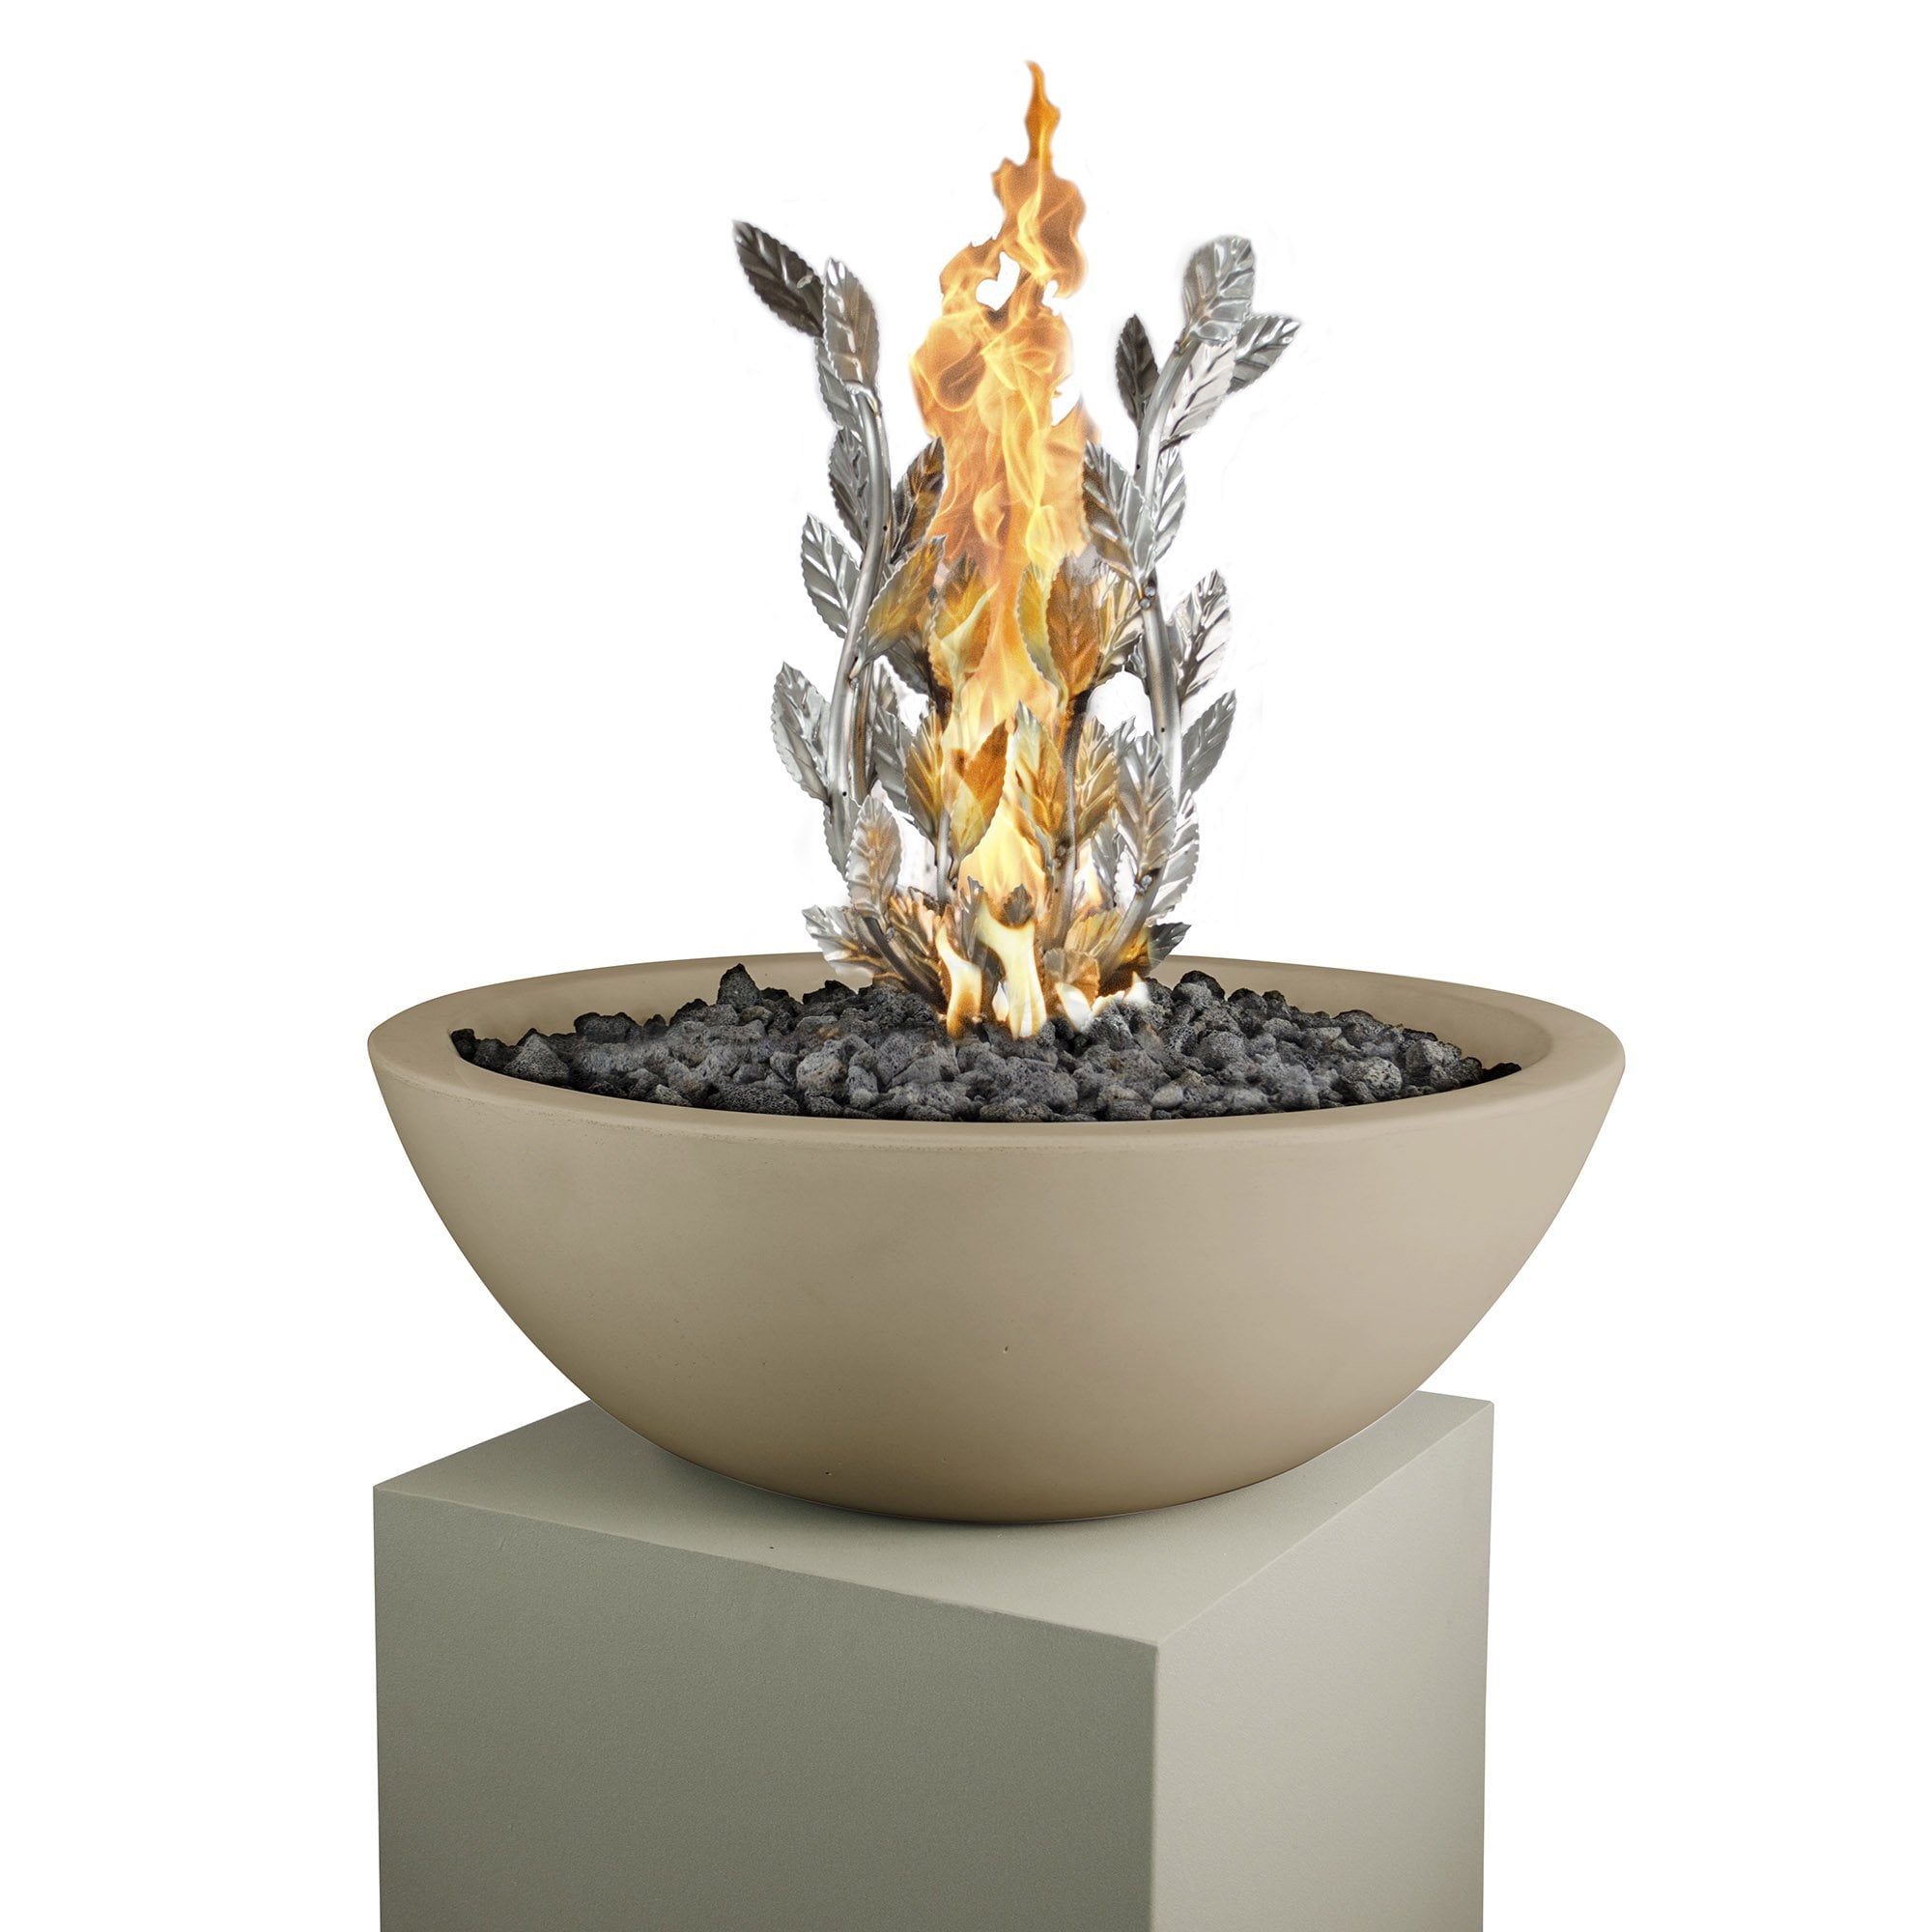 TOP Fires Stainless Steel Burning Bush Premium Gas Fire Pit Burner ornament - by The Outdoor Plus - Majestic Fountains